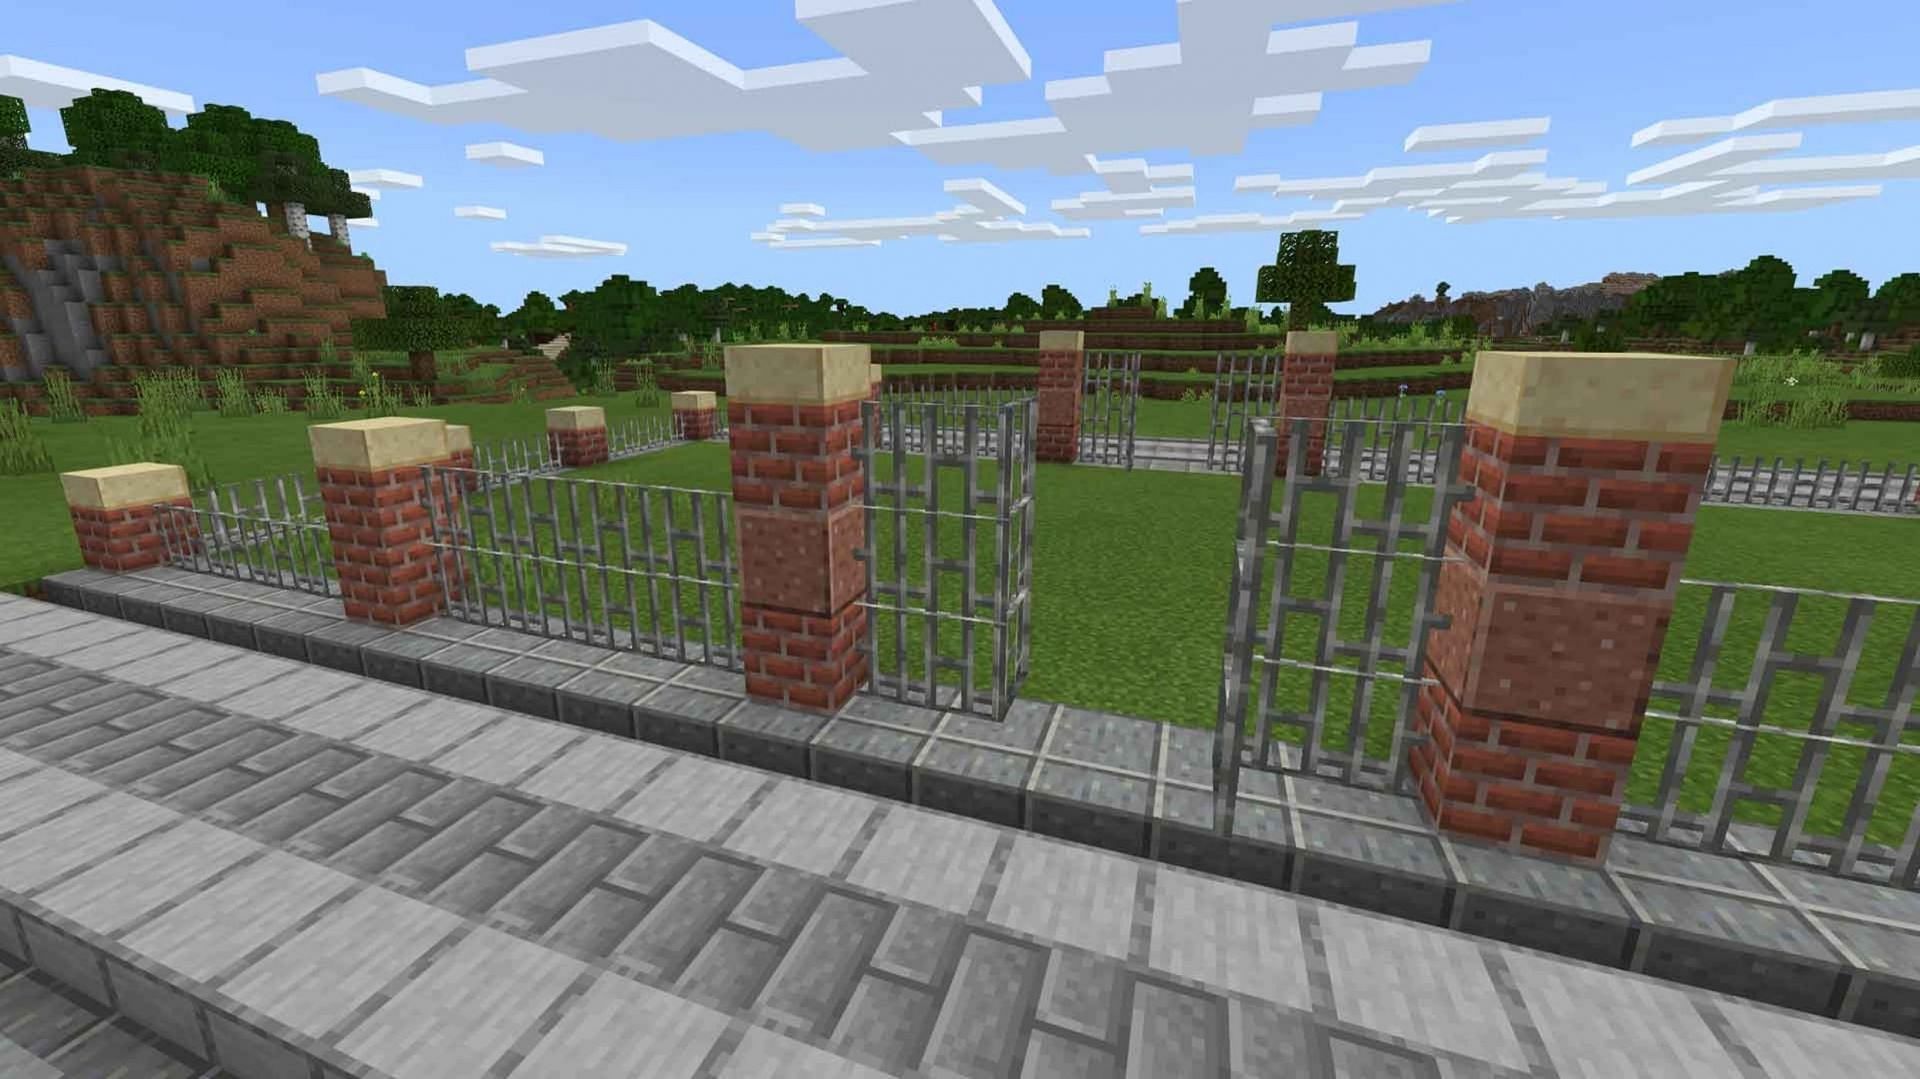 This design requires more resources, but looks both modern and urban (Image via Mojang)